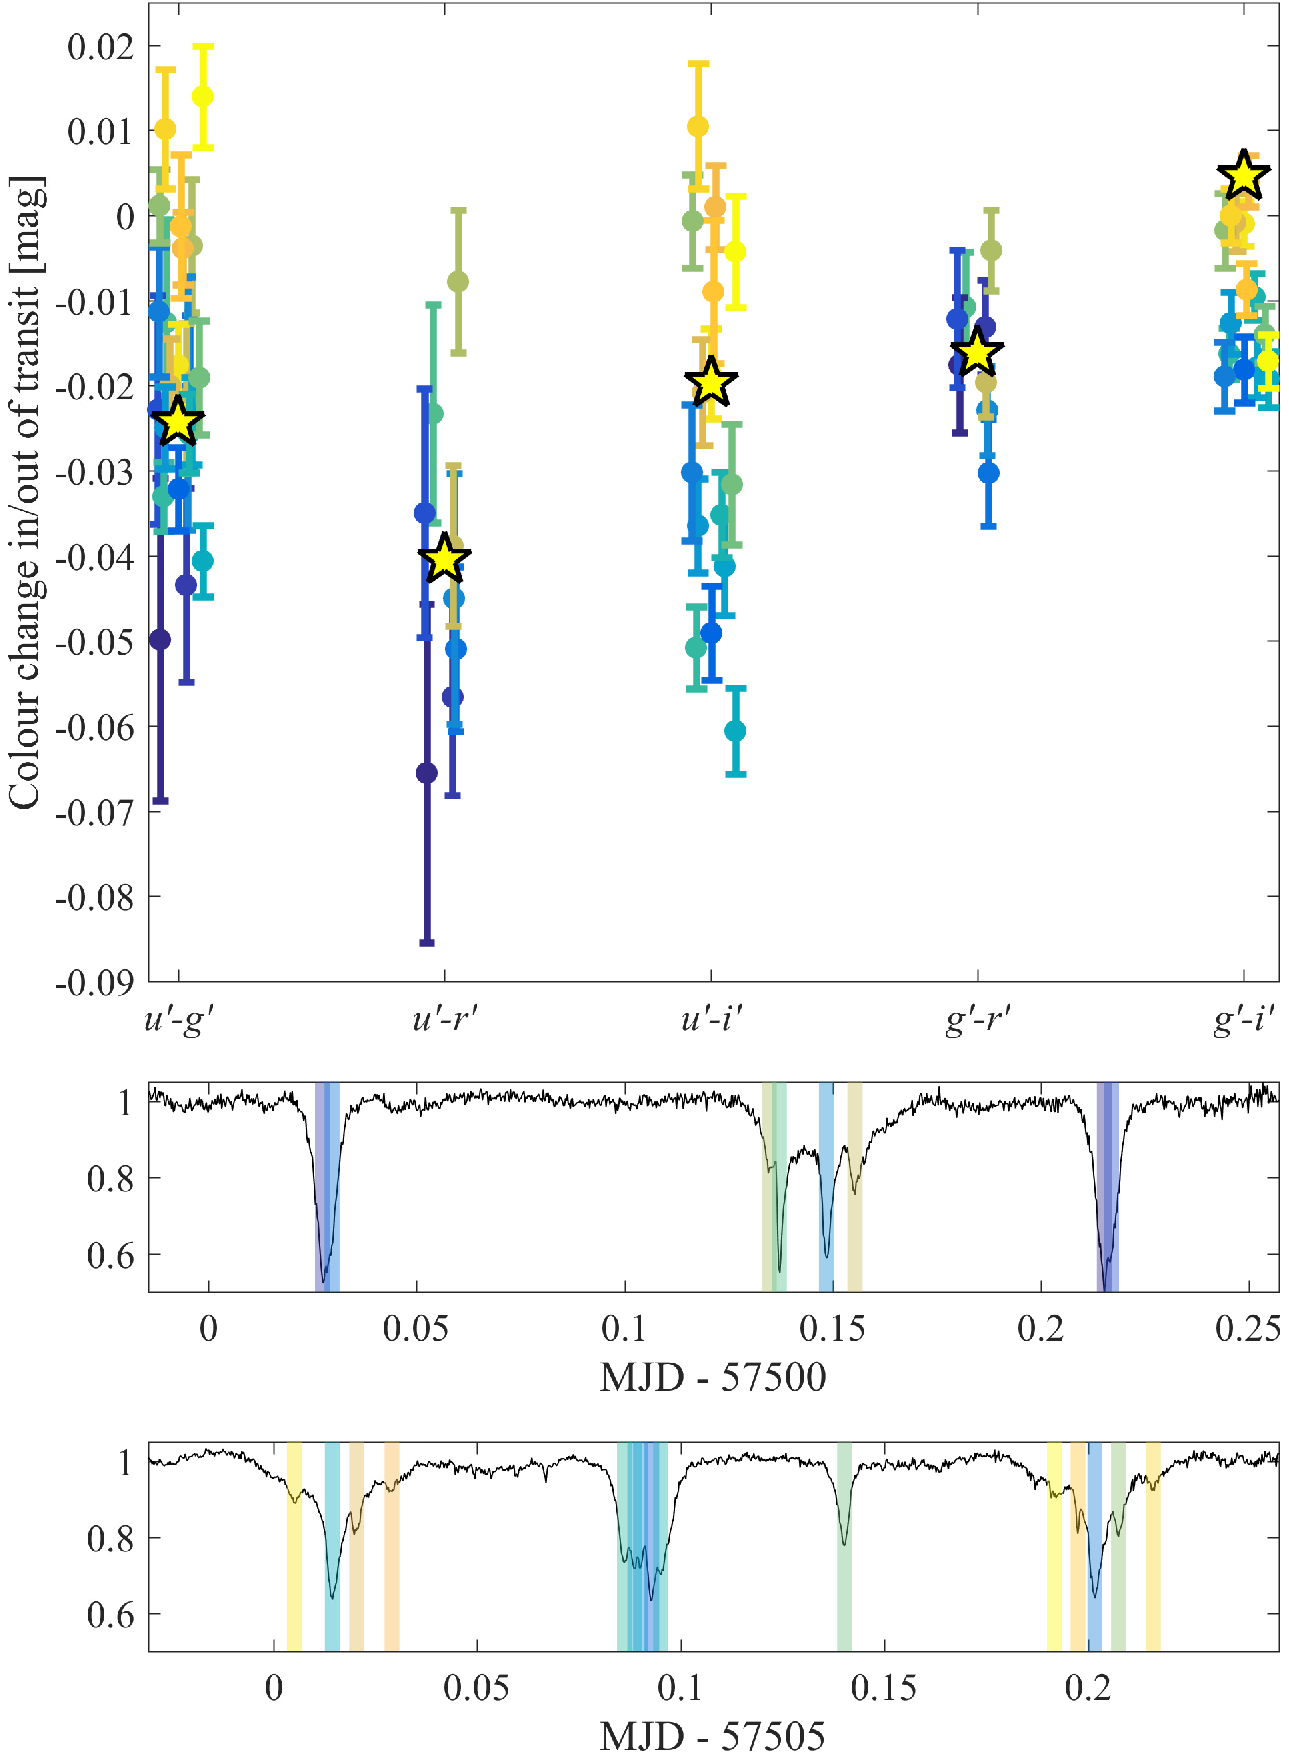 Once in a blue moon: detection of ‘bluing’ during debris transits in the white dwarf WD 1145+017